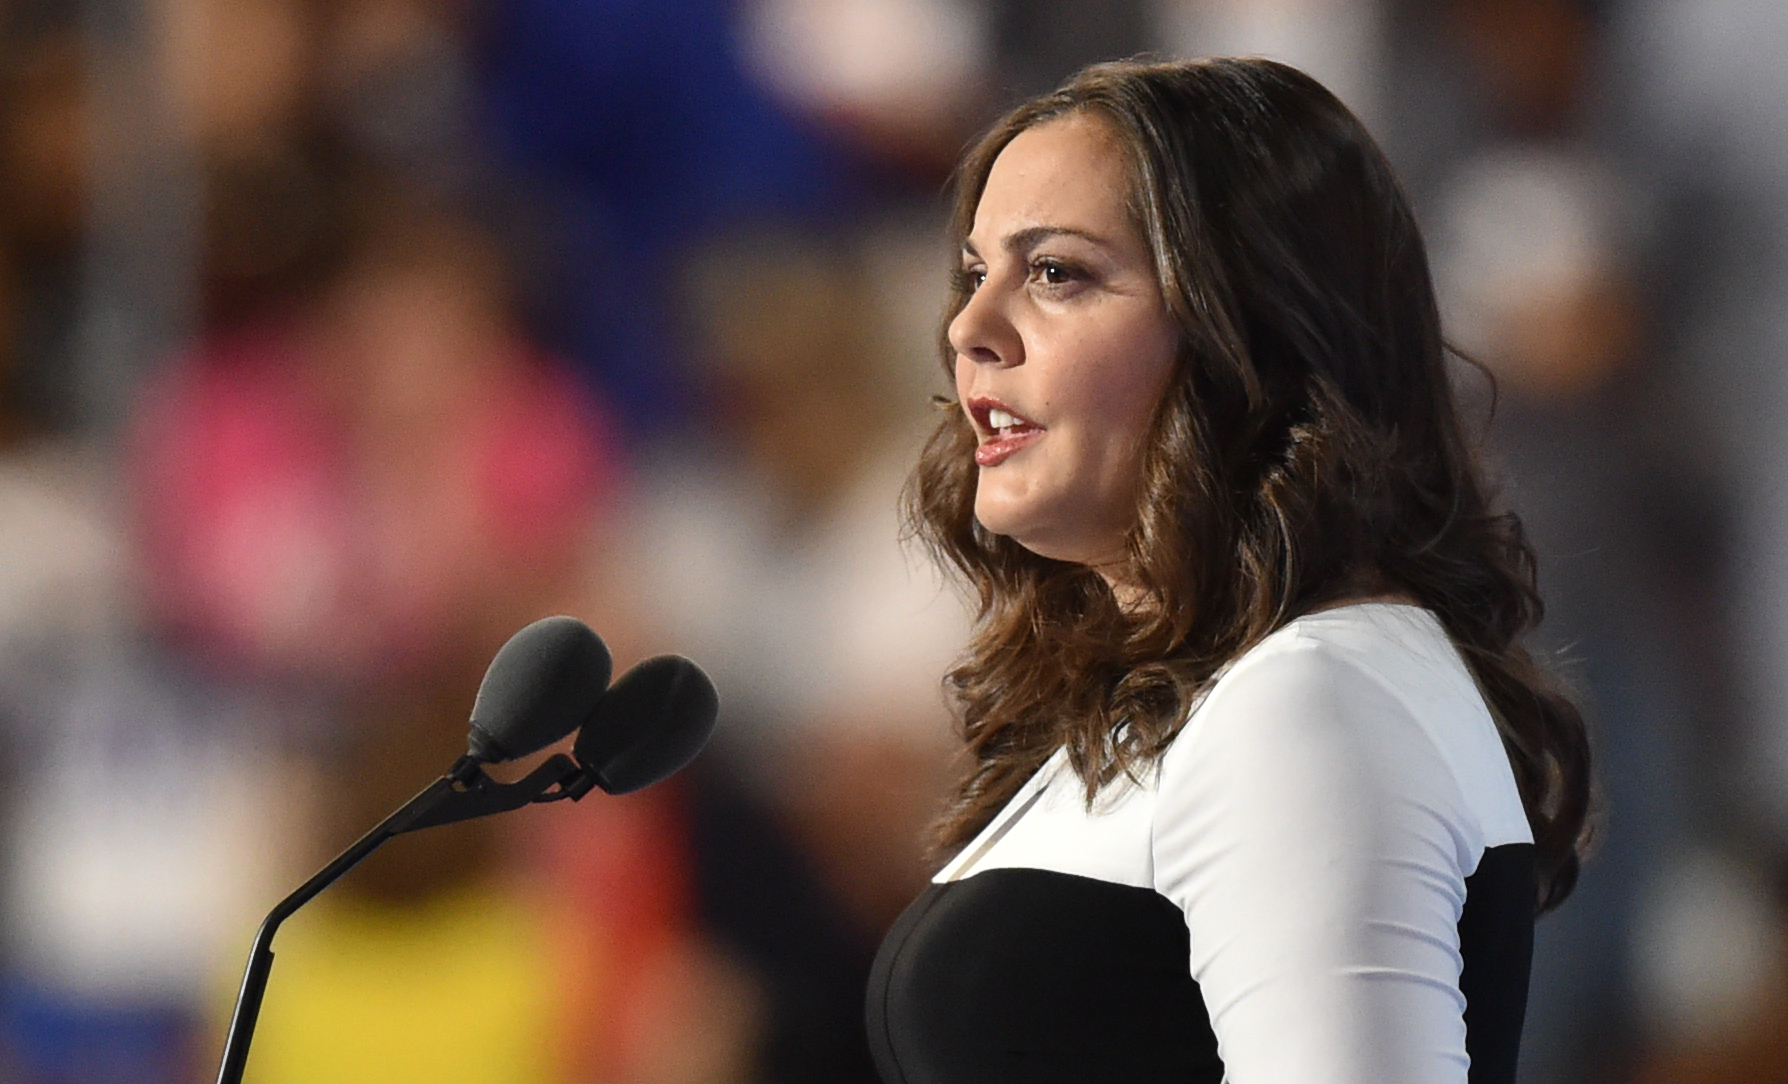 Erica Lafferty, whose mother Dawn was principal of Sandy Hook Elementary and killed while trying to protect her students, addresses the third evening session of the Democratic National Convention at the Wells Fargo Center in Philadelphia, Pennsylvania, July 27, 2016. (NICHOLAS KAMM—AFP/Getty Images)